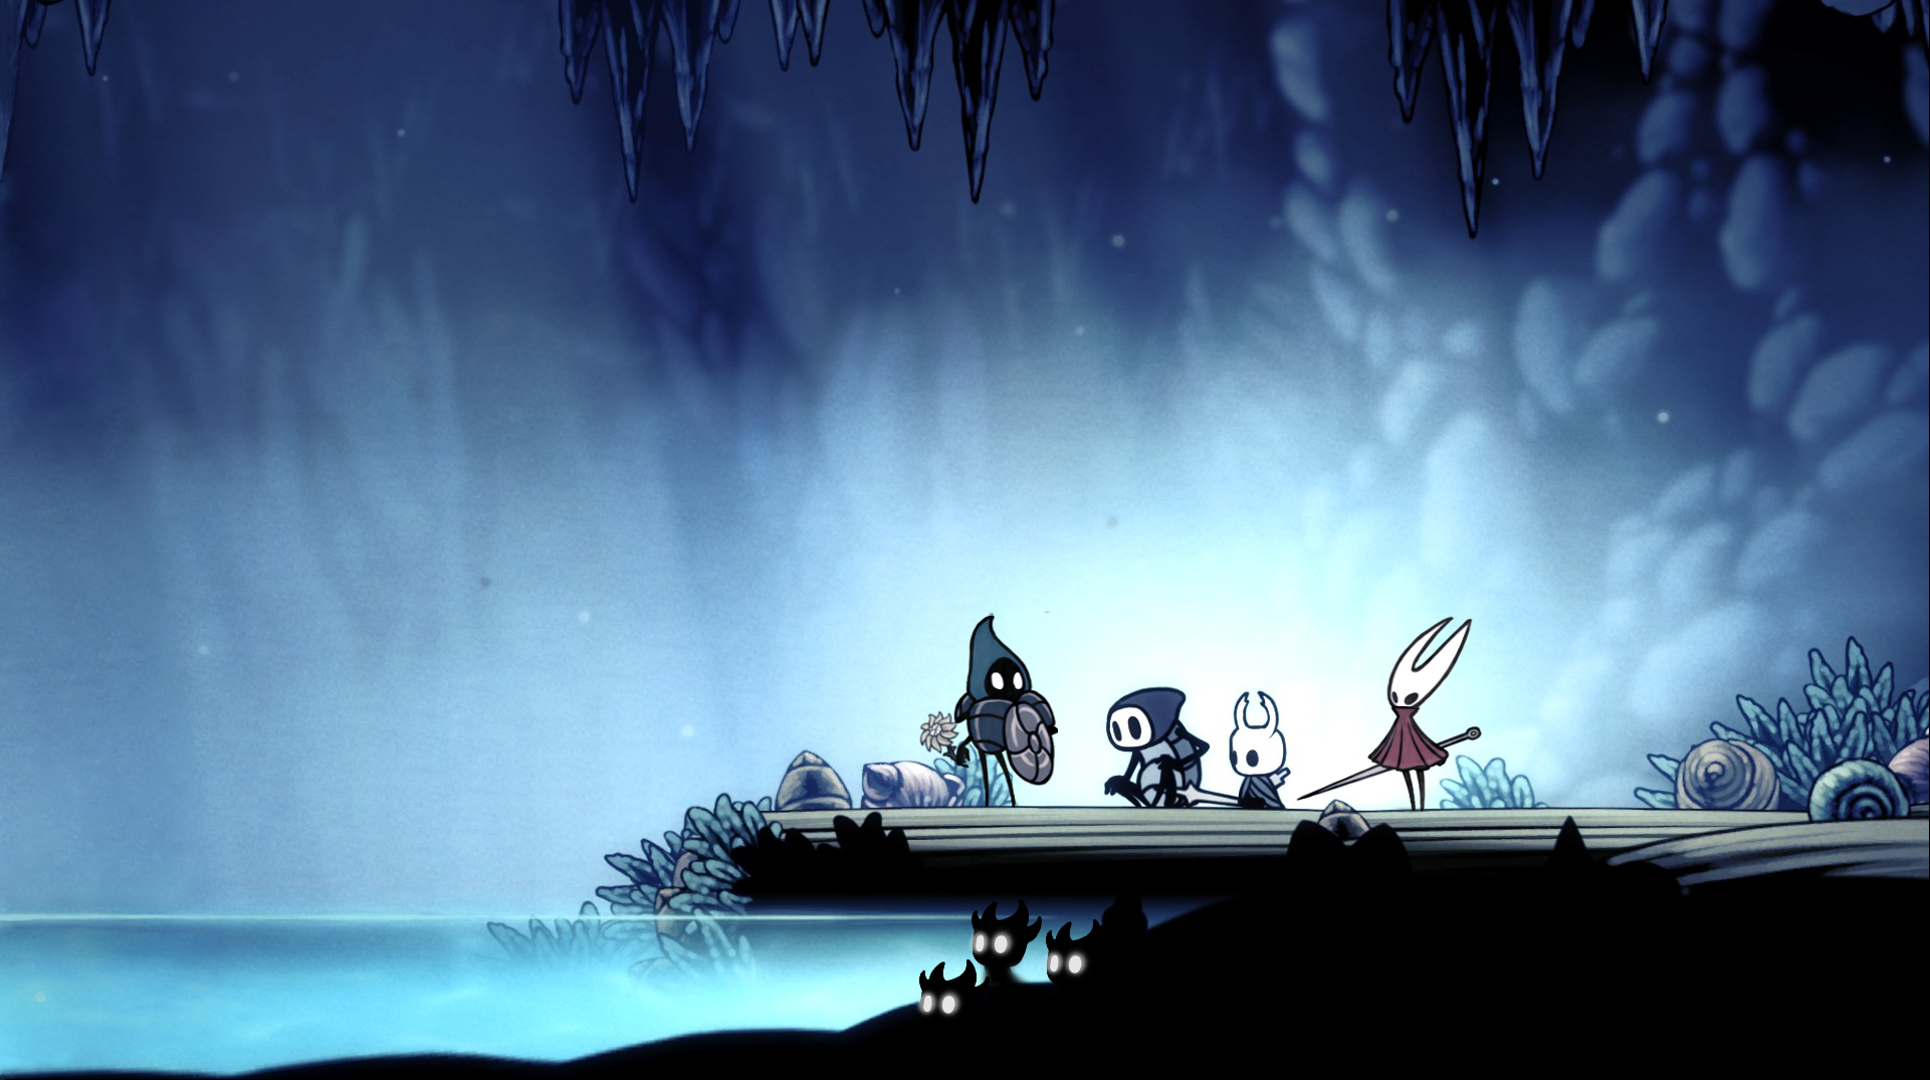 Hollow Knight Wallpaper 1920x1080 and 3840x1080   Album on Imgur